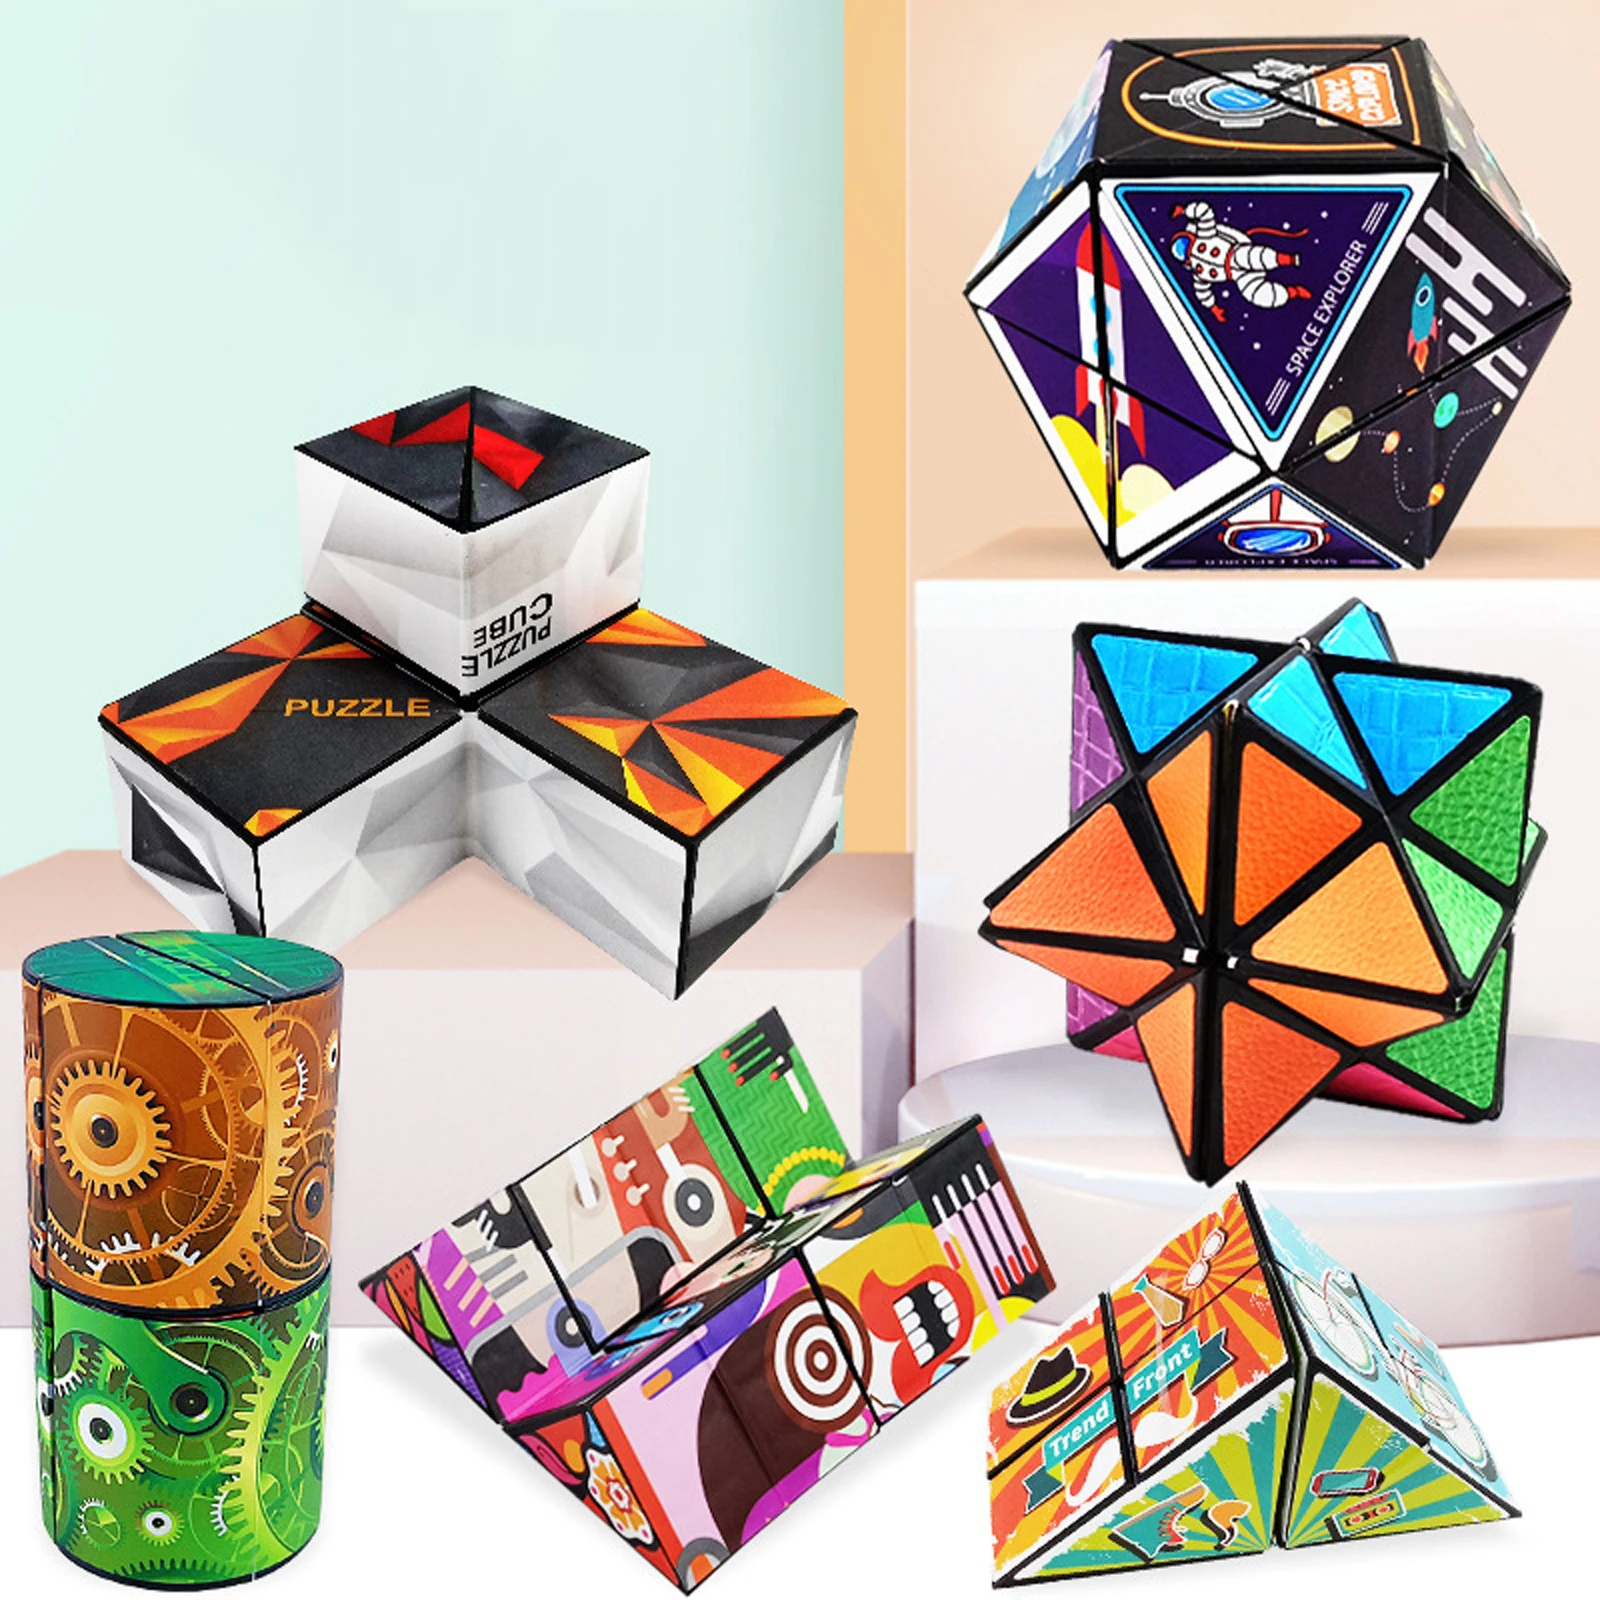 Variety Geometric Changeable Children's 3D Geometric Magnetic Magic Cube Infinite Flip Intelligence Puzzle Decompression Toy